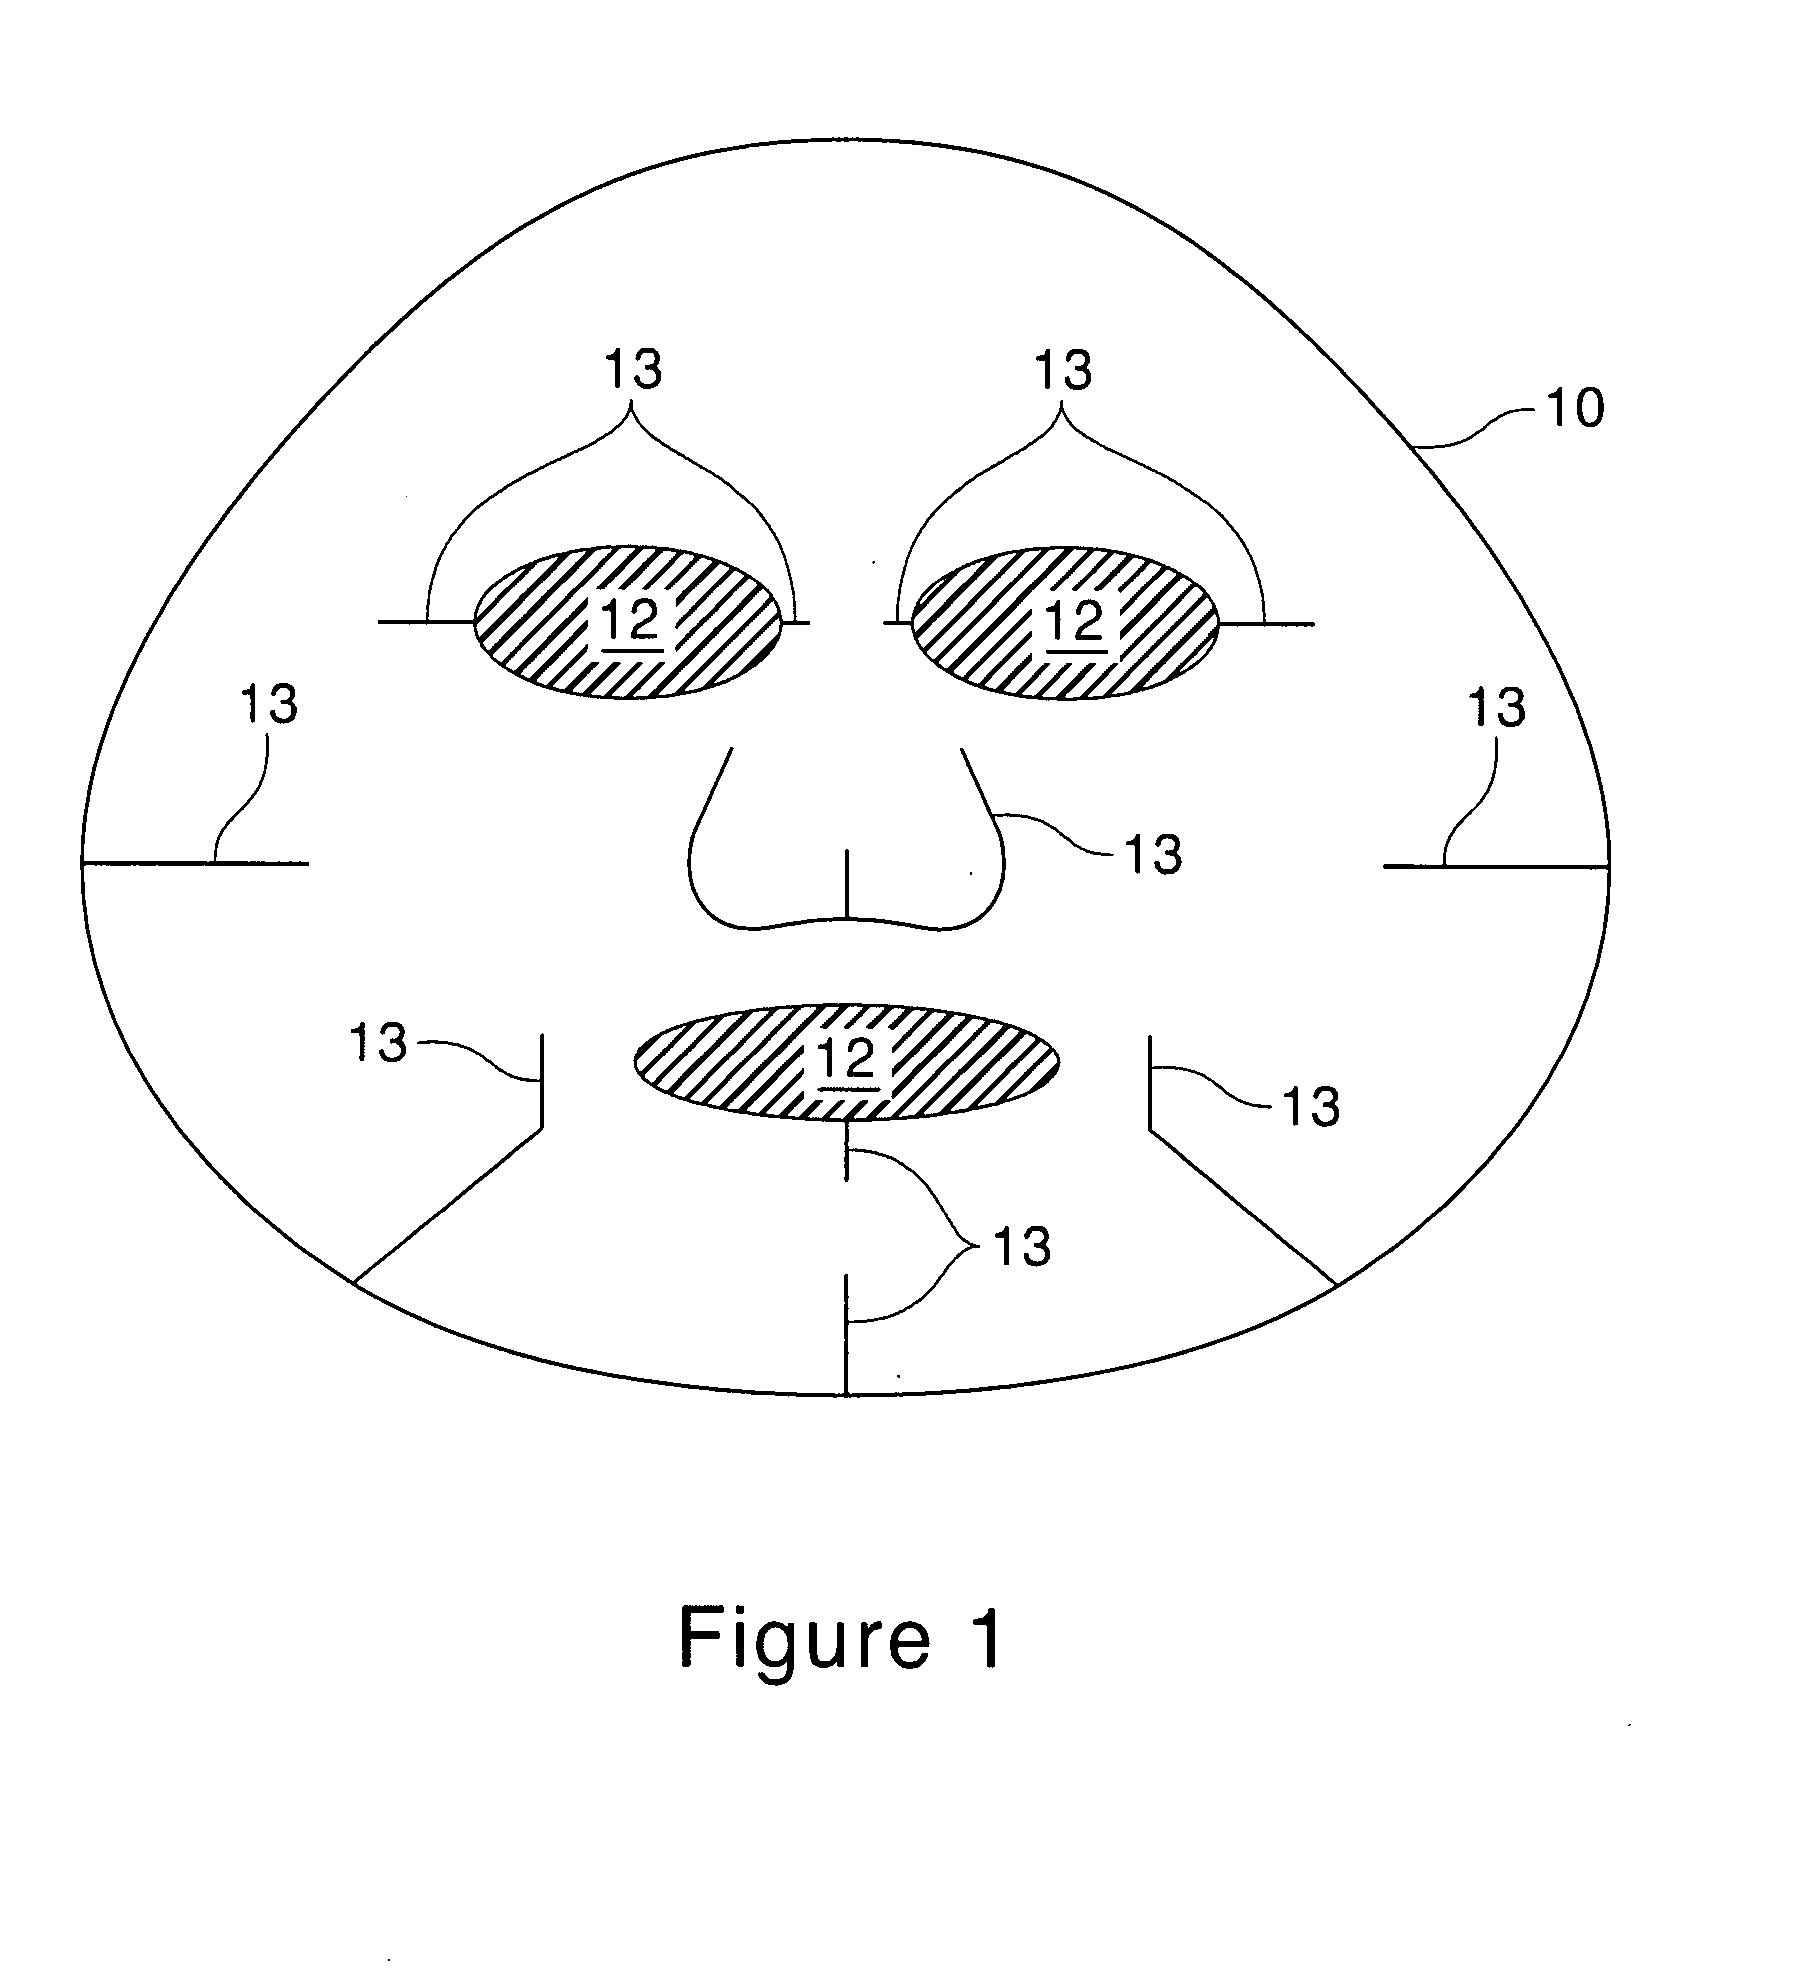 Treatment articles capable of delivering intensive care and overall treatment simultaneously